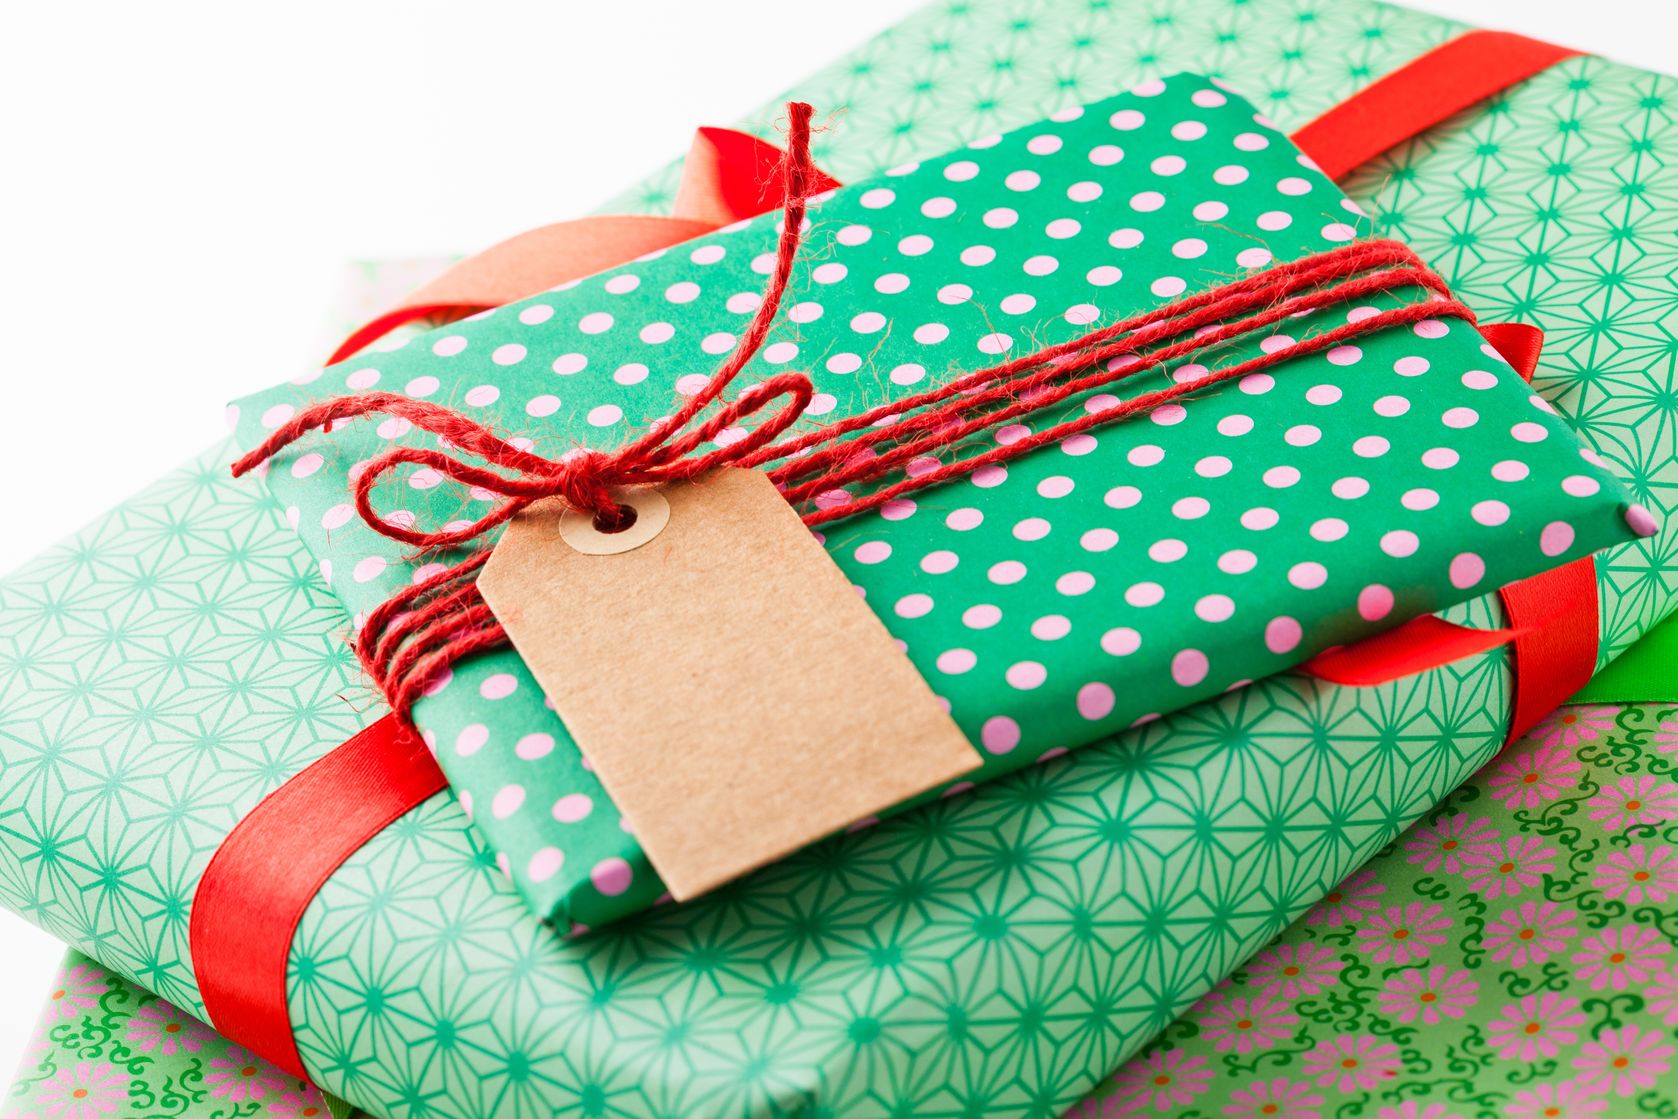 Consider returning unwanted holiday gifts to save more. 